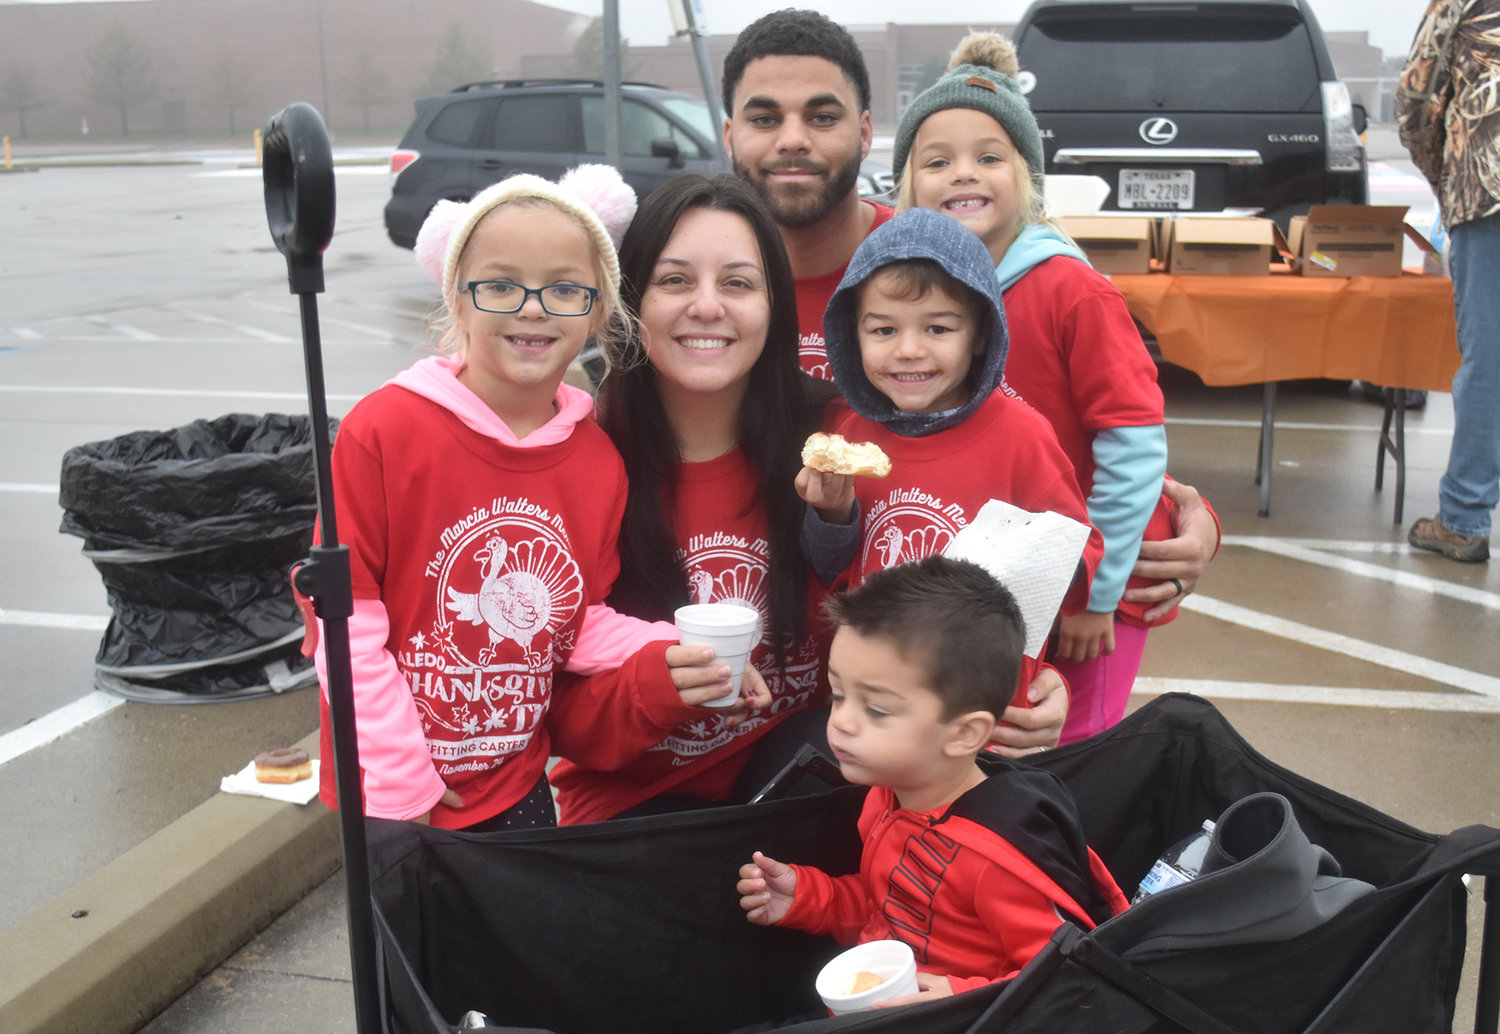 The Lilavois family came ready to run. Shown are Jordain and Ashley along with children Addyson, Brooklynn, Cason, and Jape.